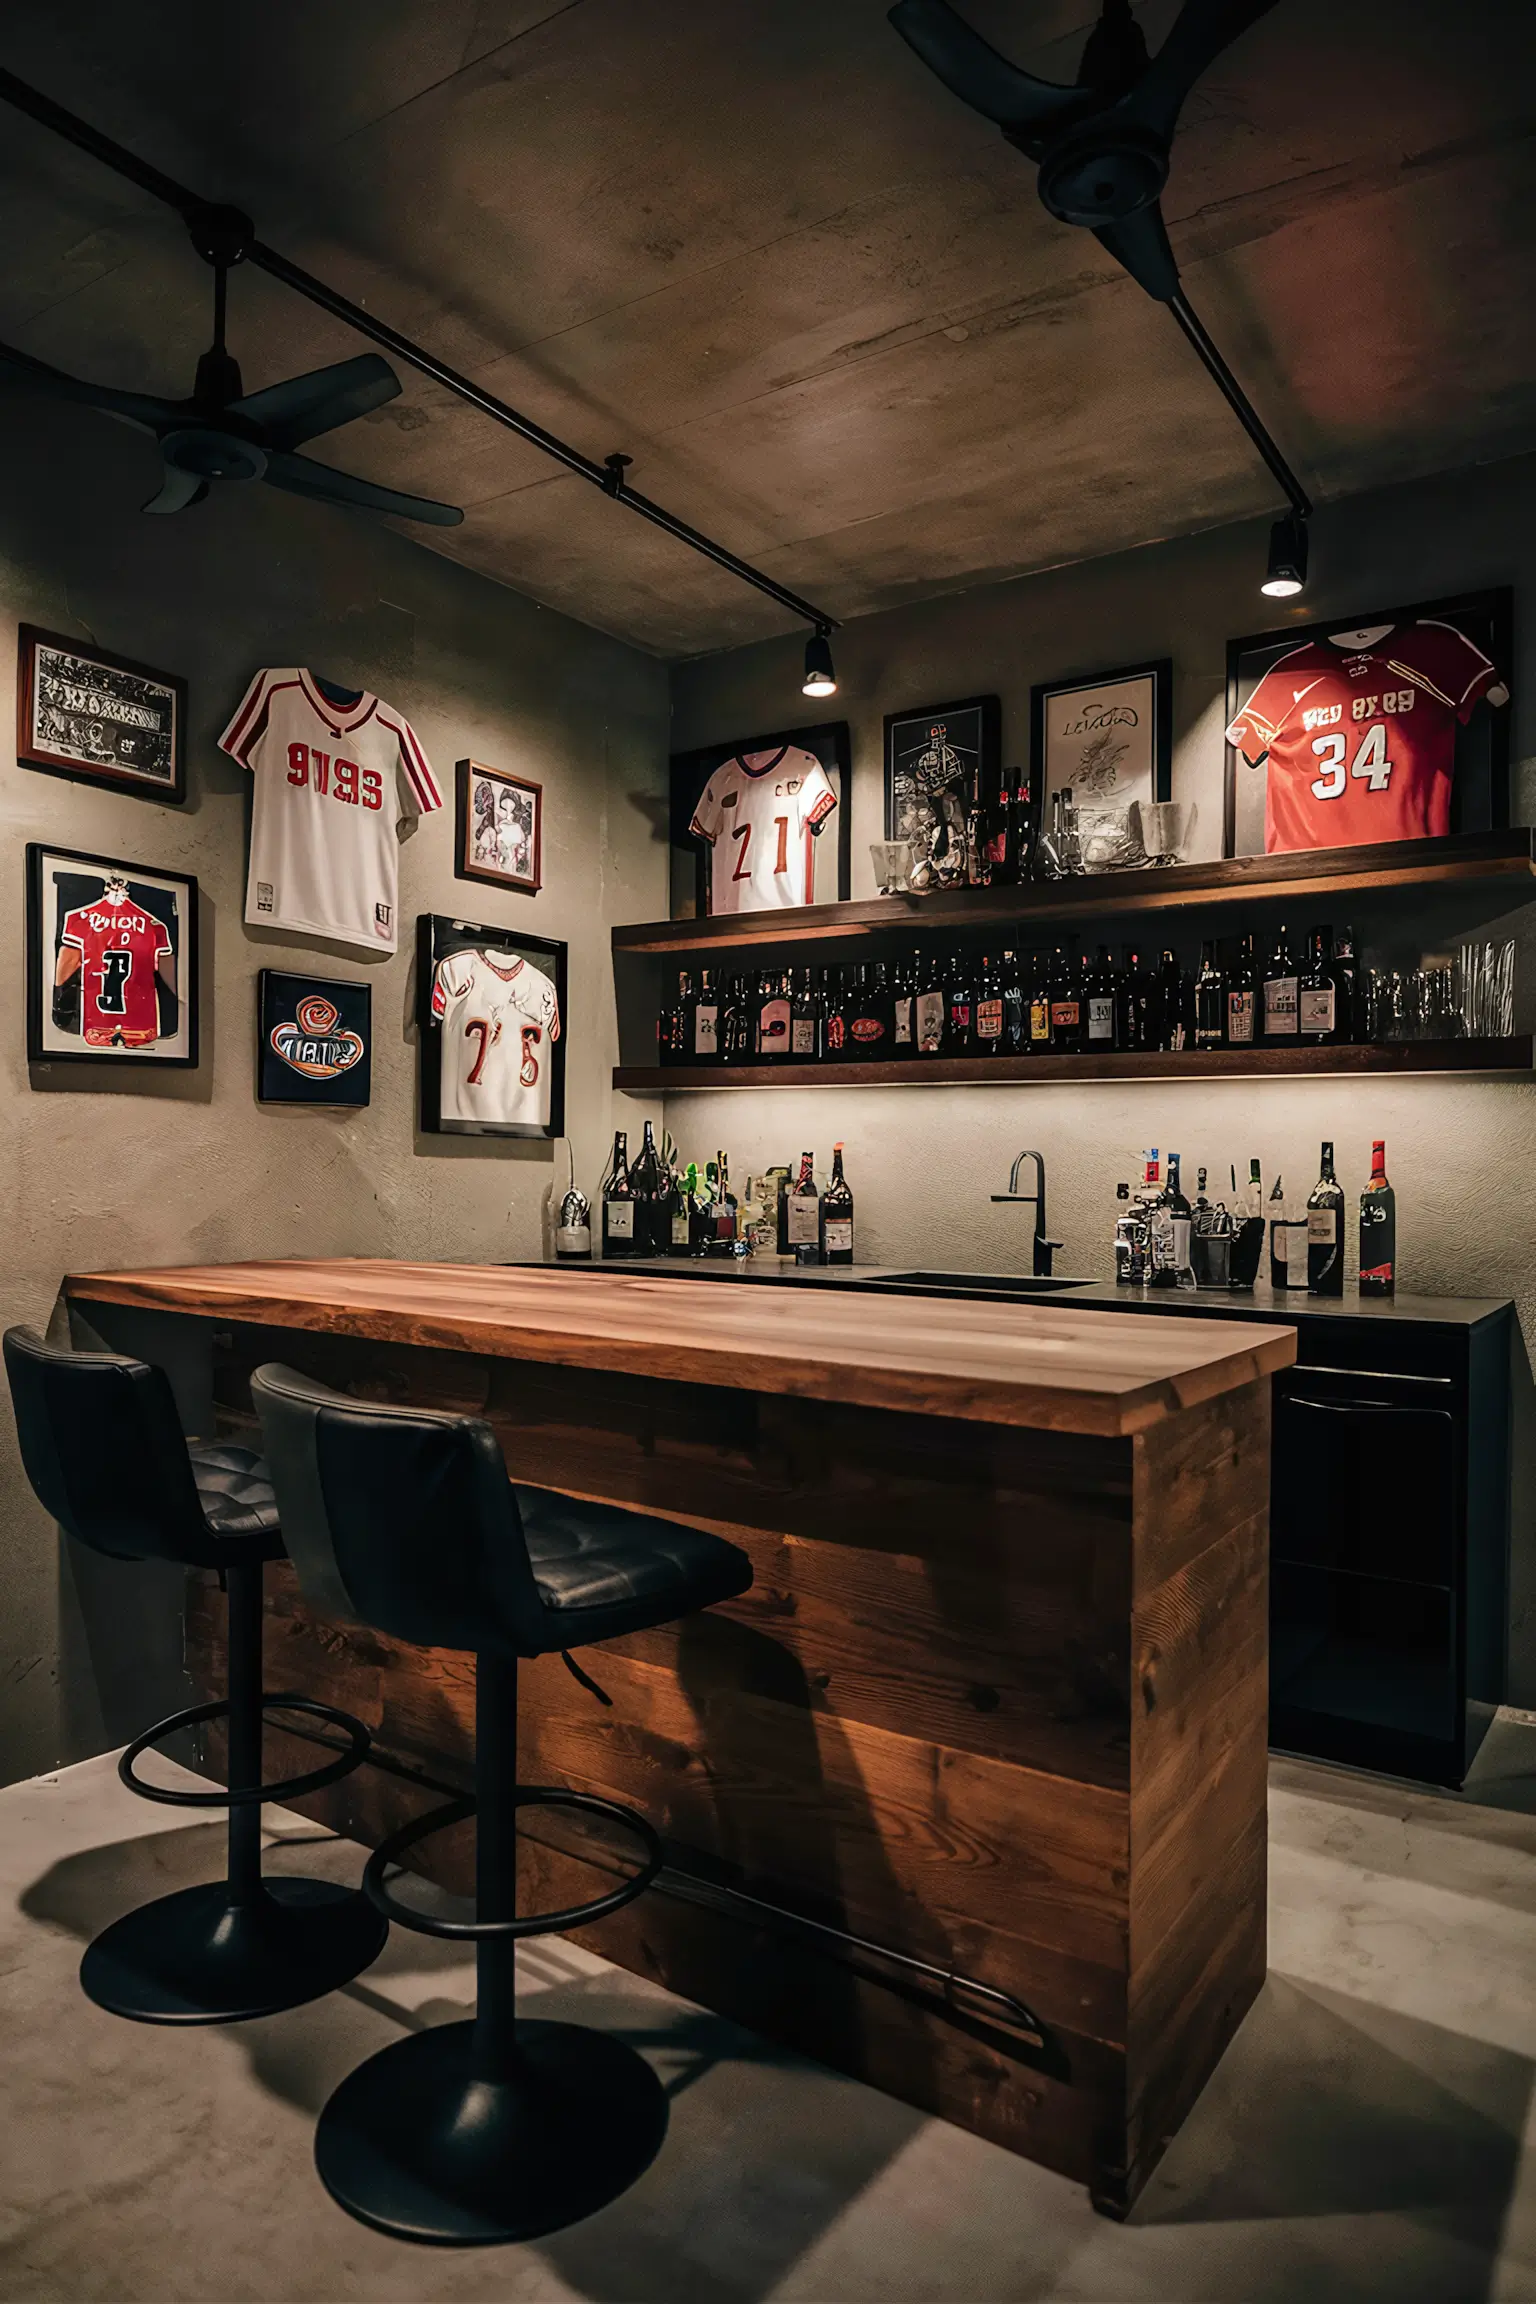 Man cave basement bar with sports memorabilia and leather bar stools.